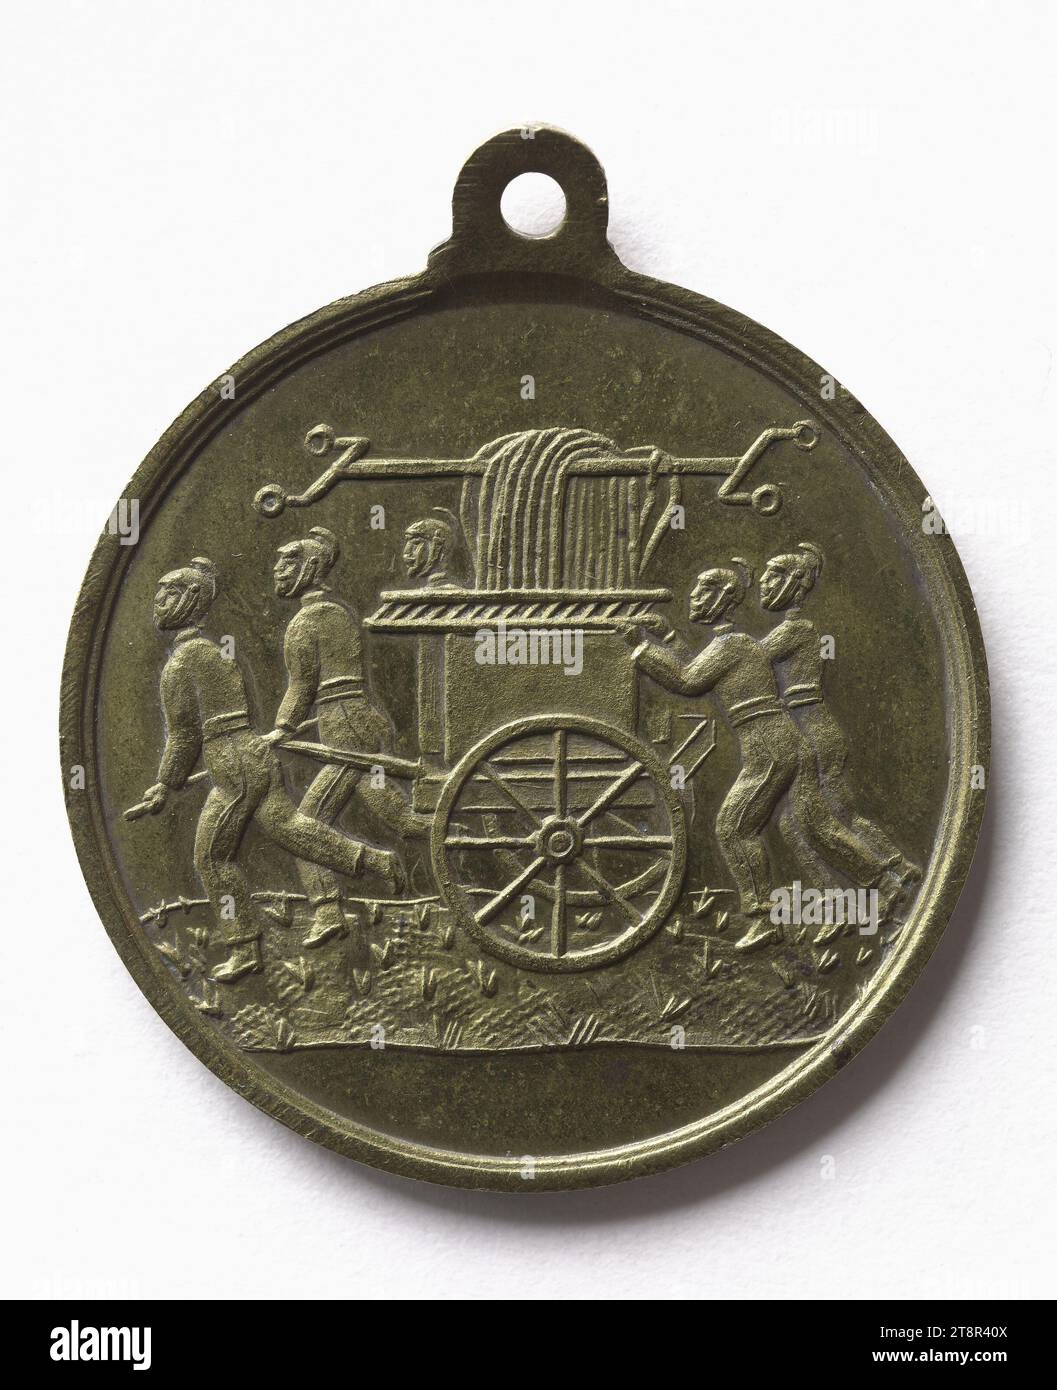 Souvenir of the great contest of maneuvers of fire pumps in Asnieres, August 11, 1878, Array, Numismatic, Medal, Copper, Silver plated = silver plating, Dimensions - Work: Diameter: 3.3 cm, Weight (type dimension): 8.46 g Stock Photo